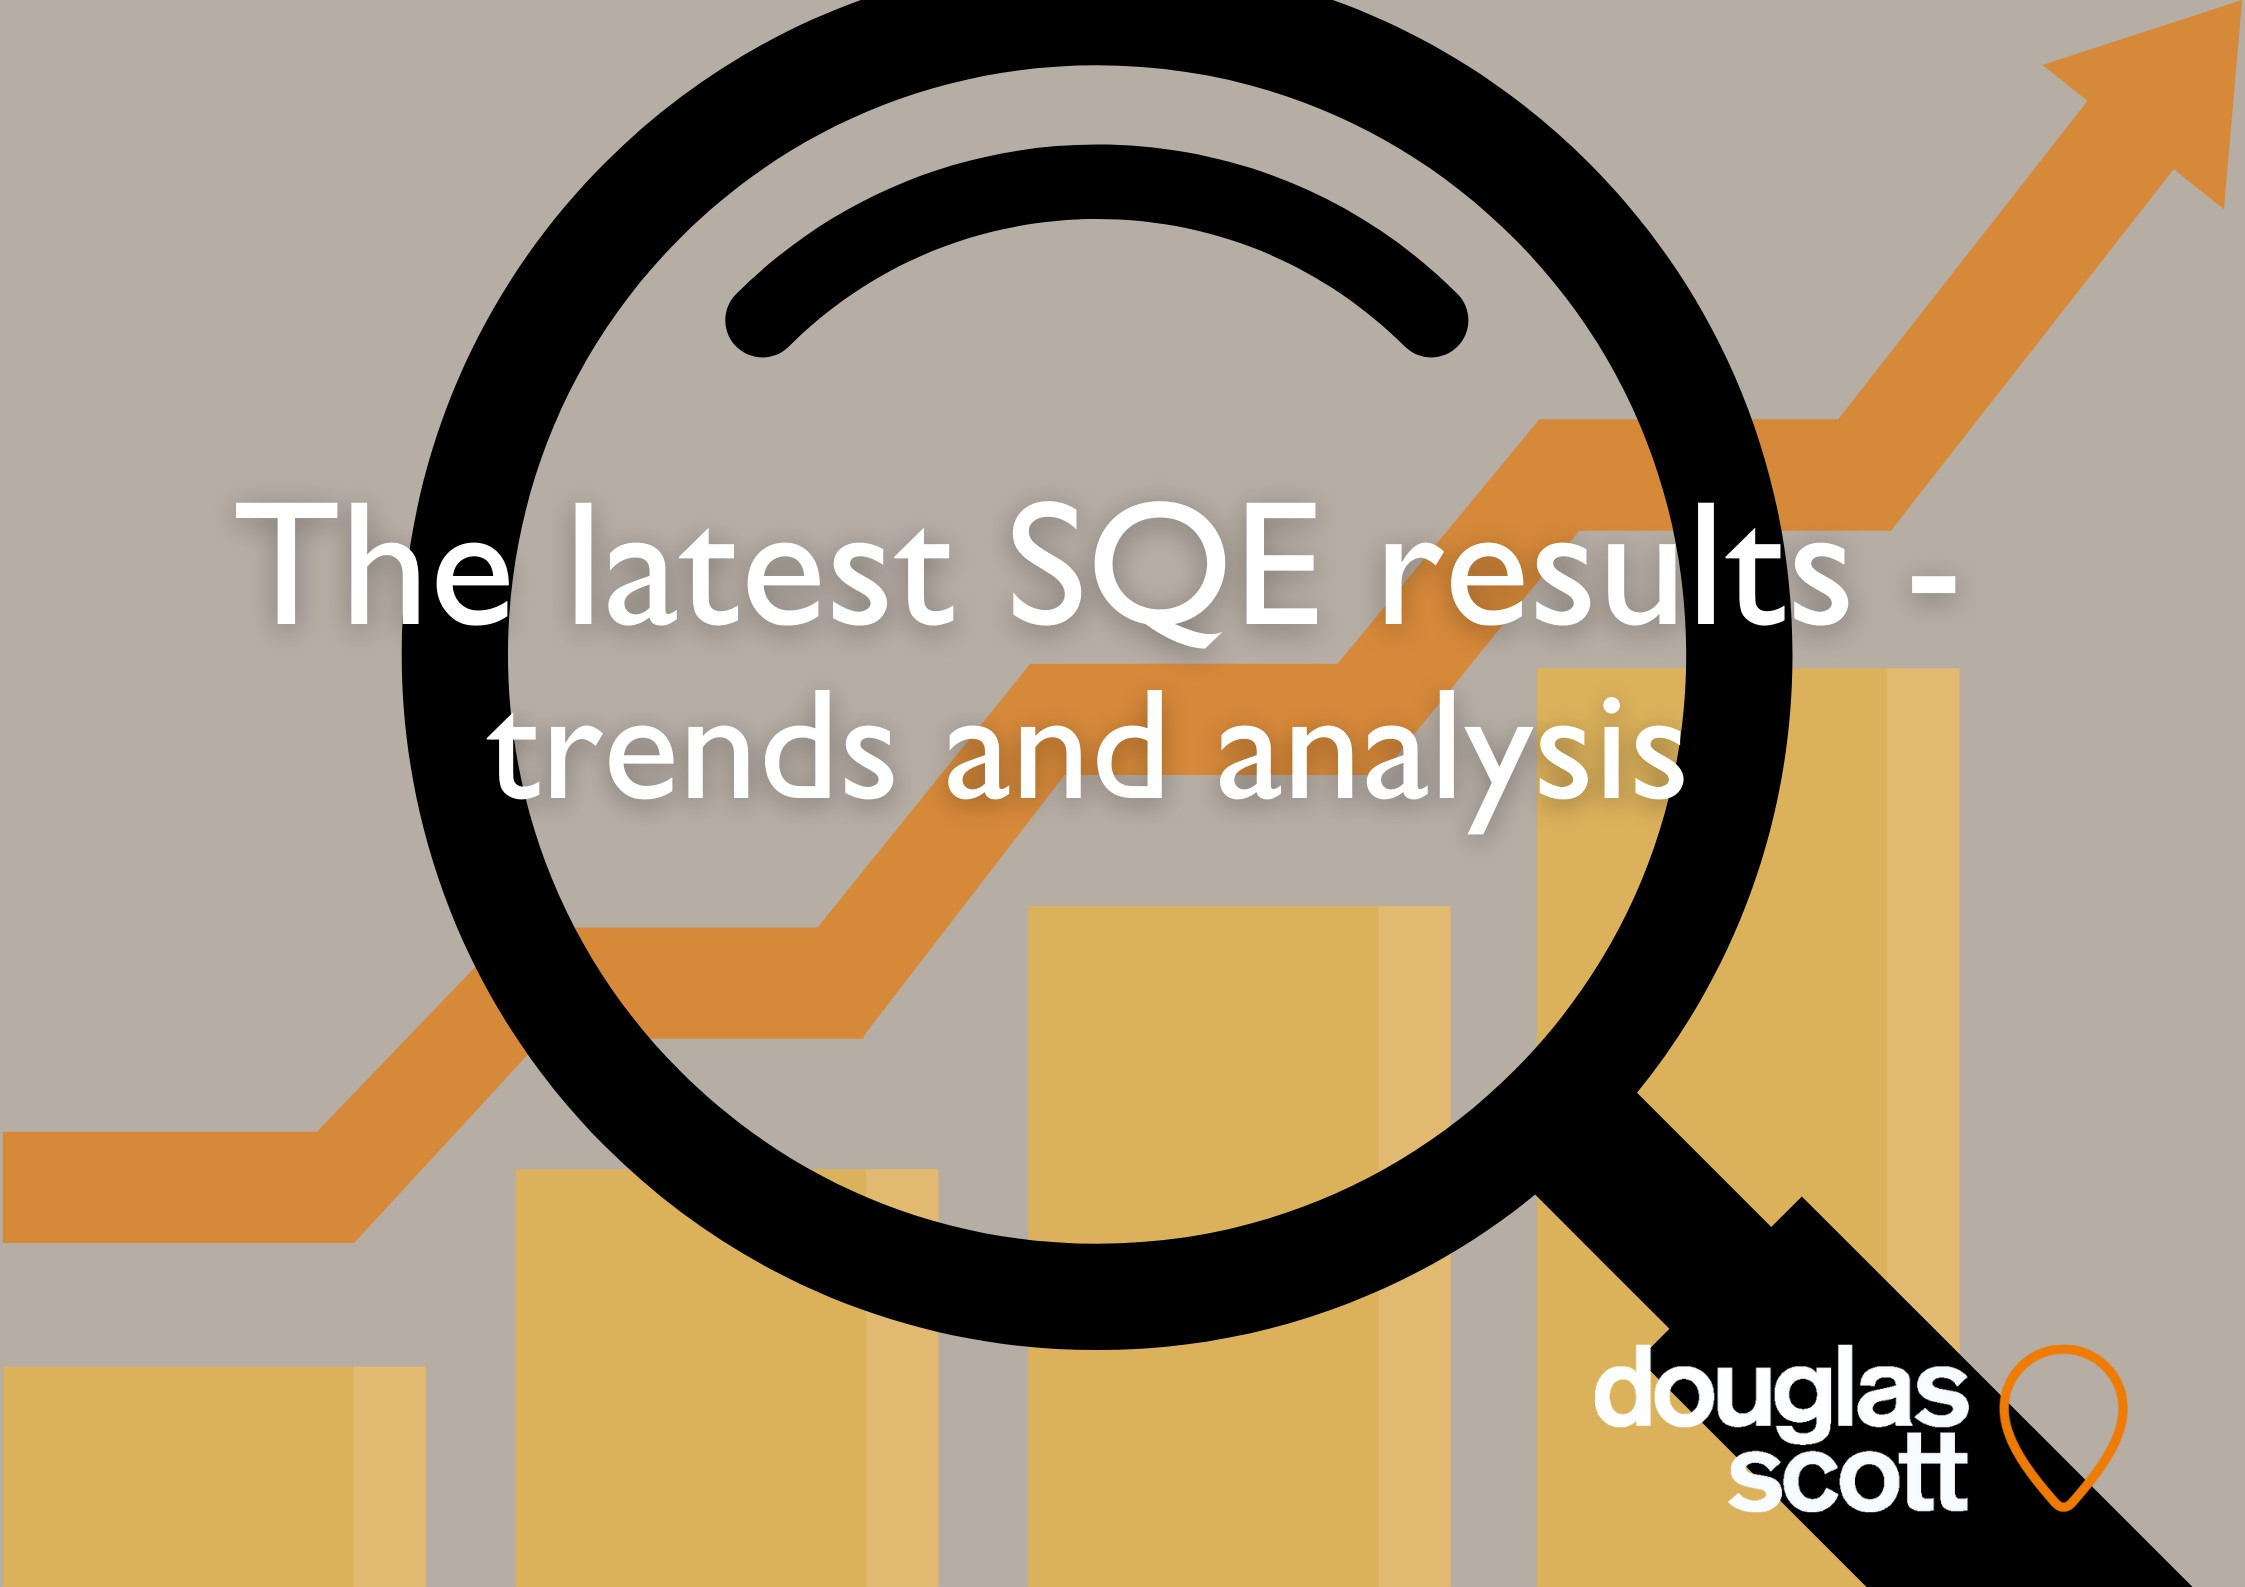 GCSE trends: what this year's results tell us